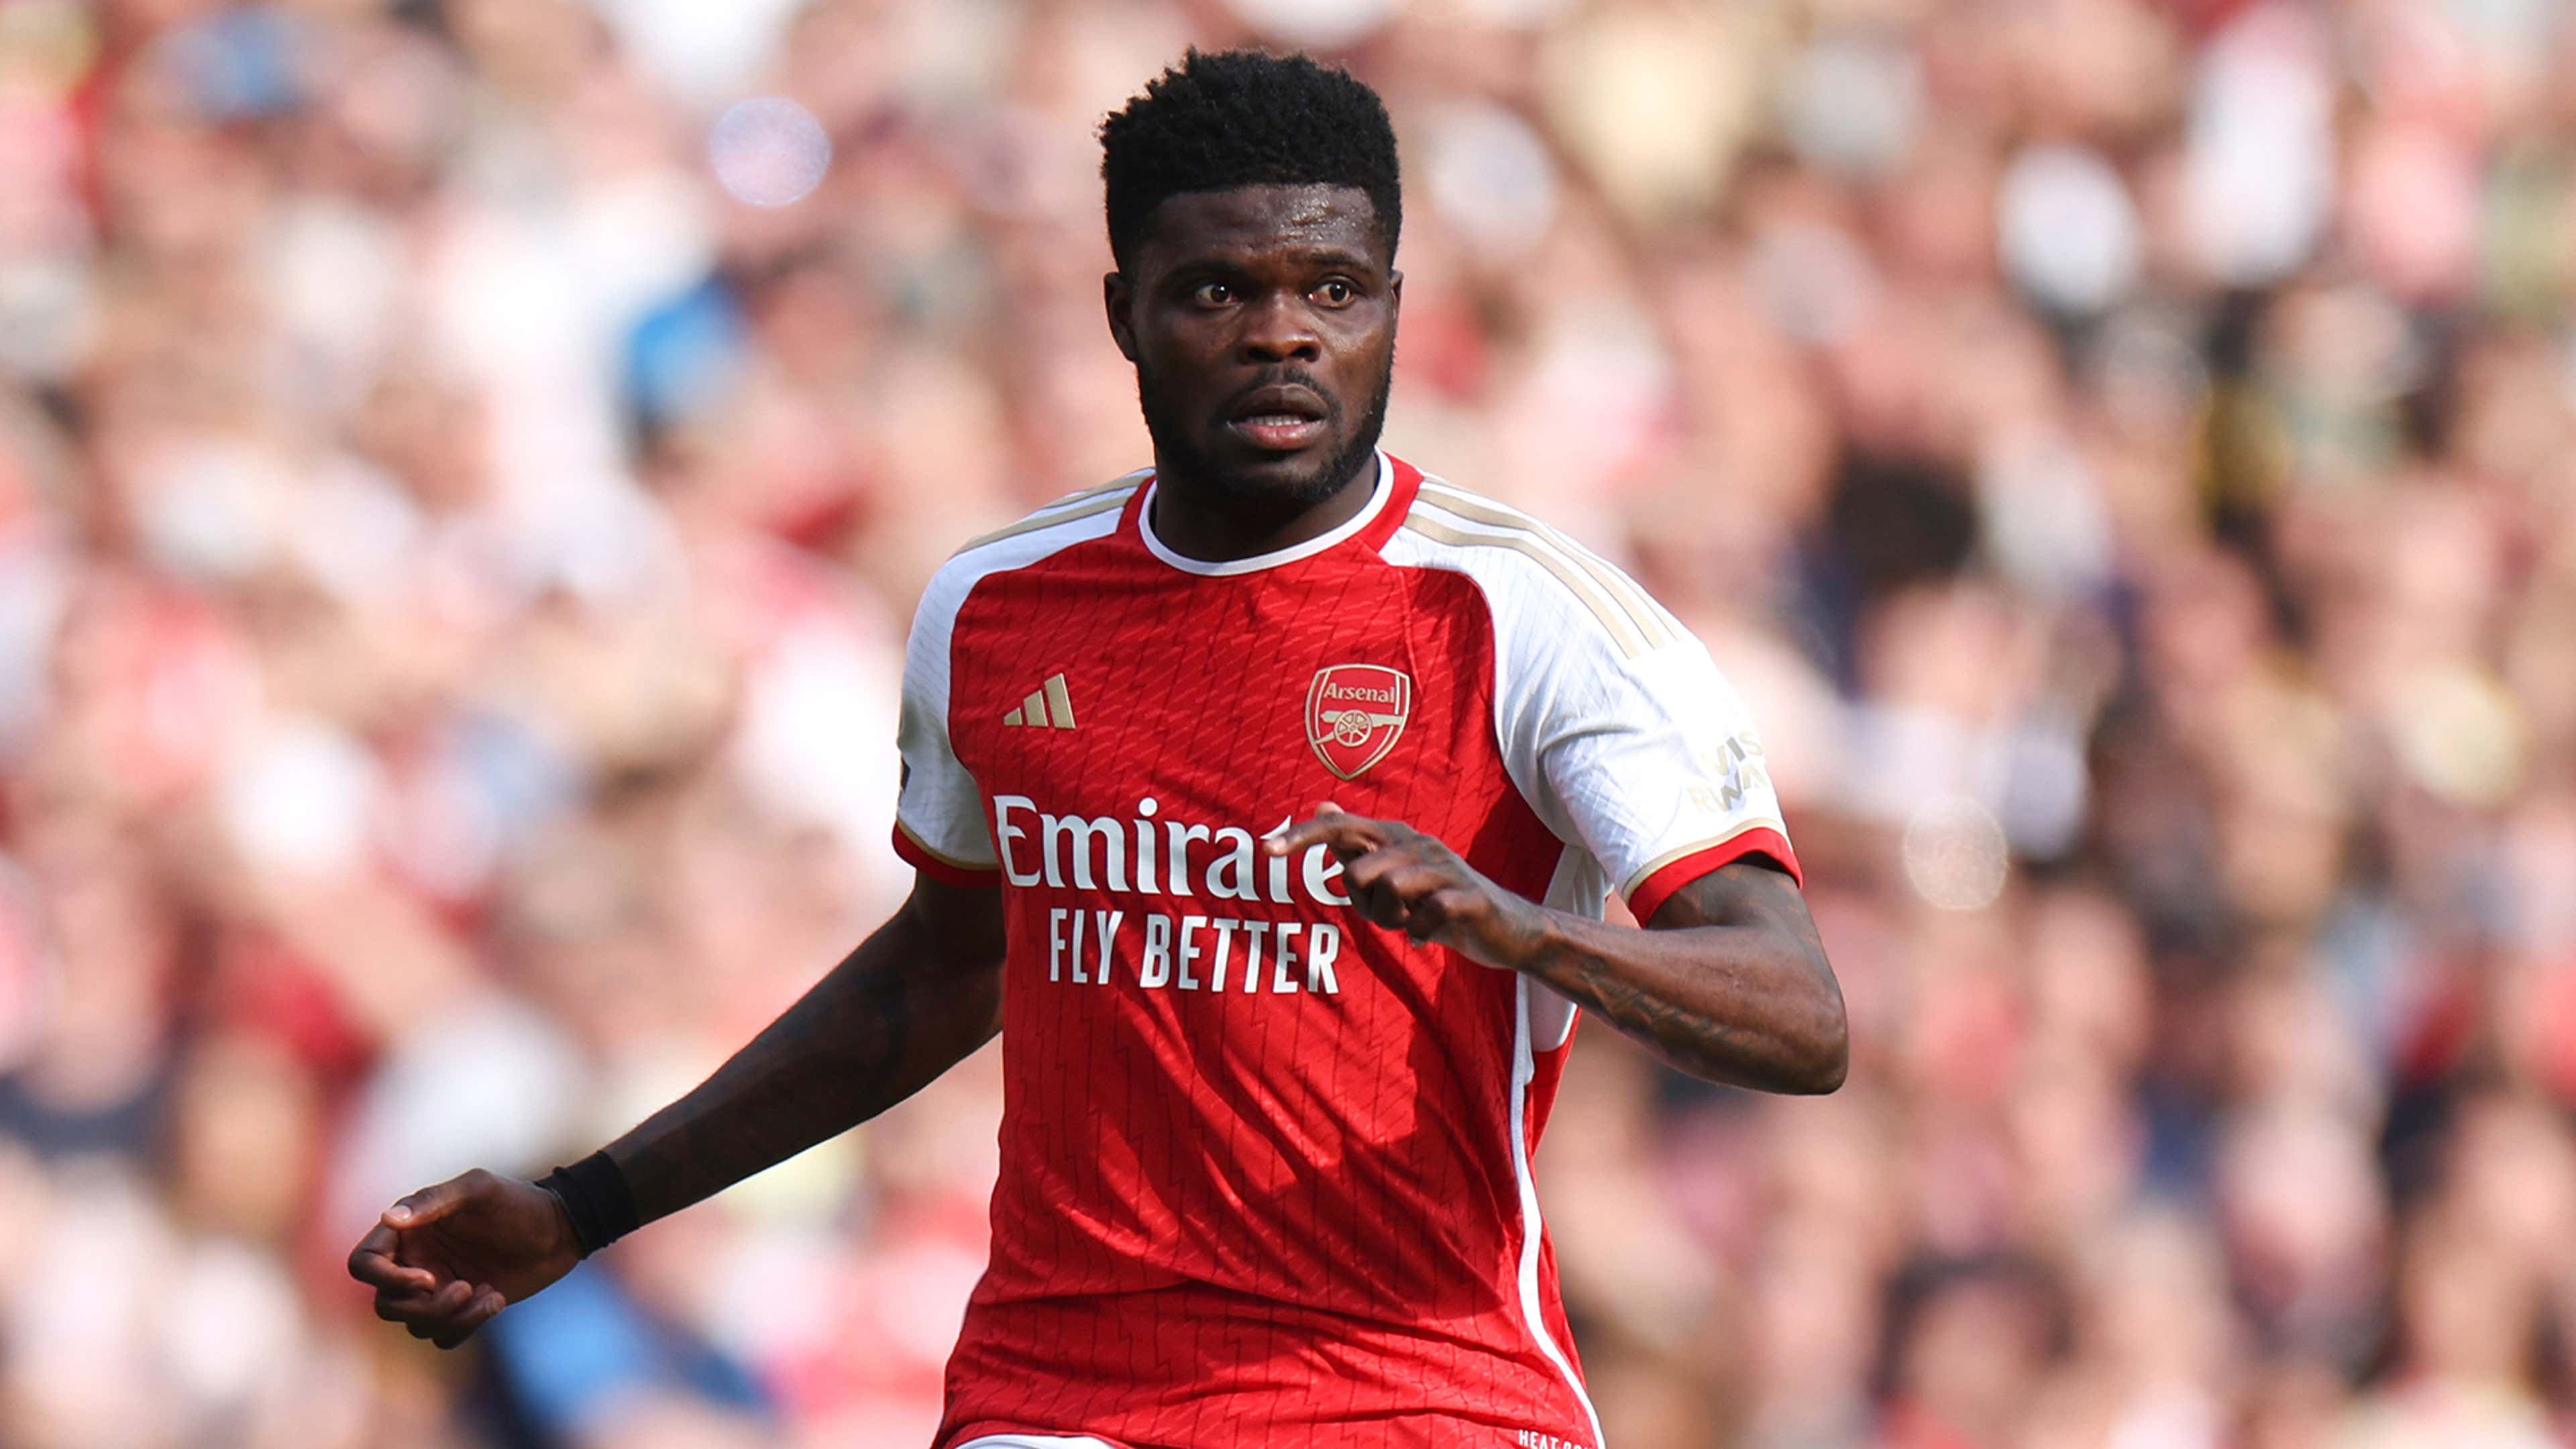 Thomas Partey on the move? Juventus open transfer talks with Arsenal after agreeing personal terms with midfielder | Goal.com